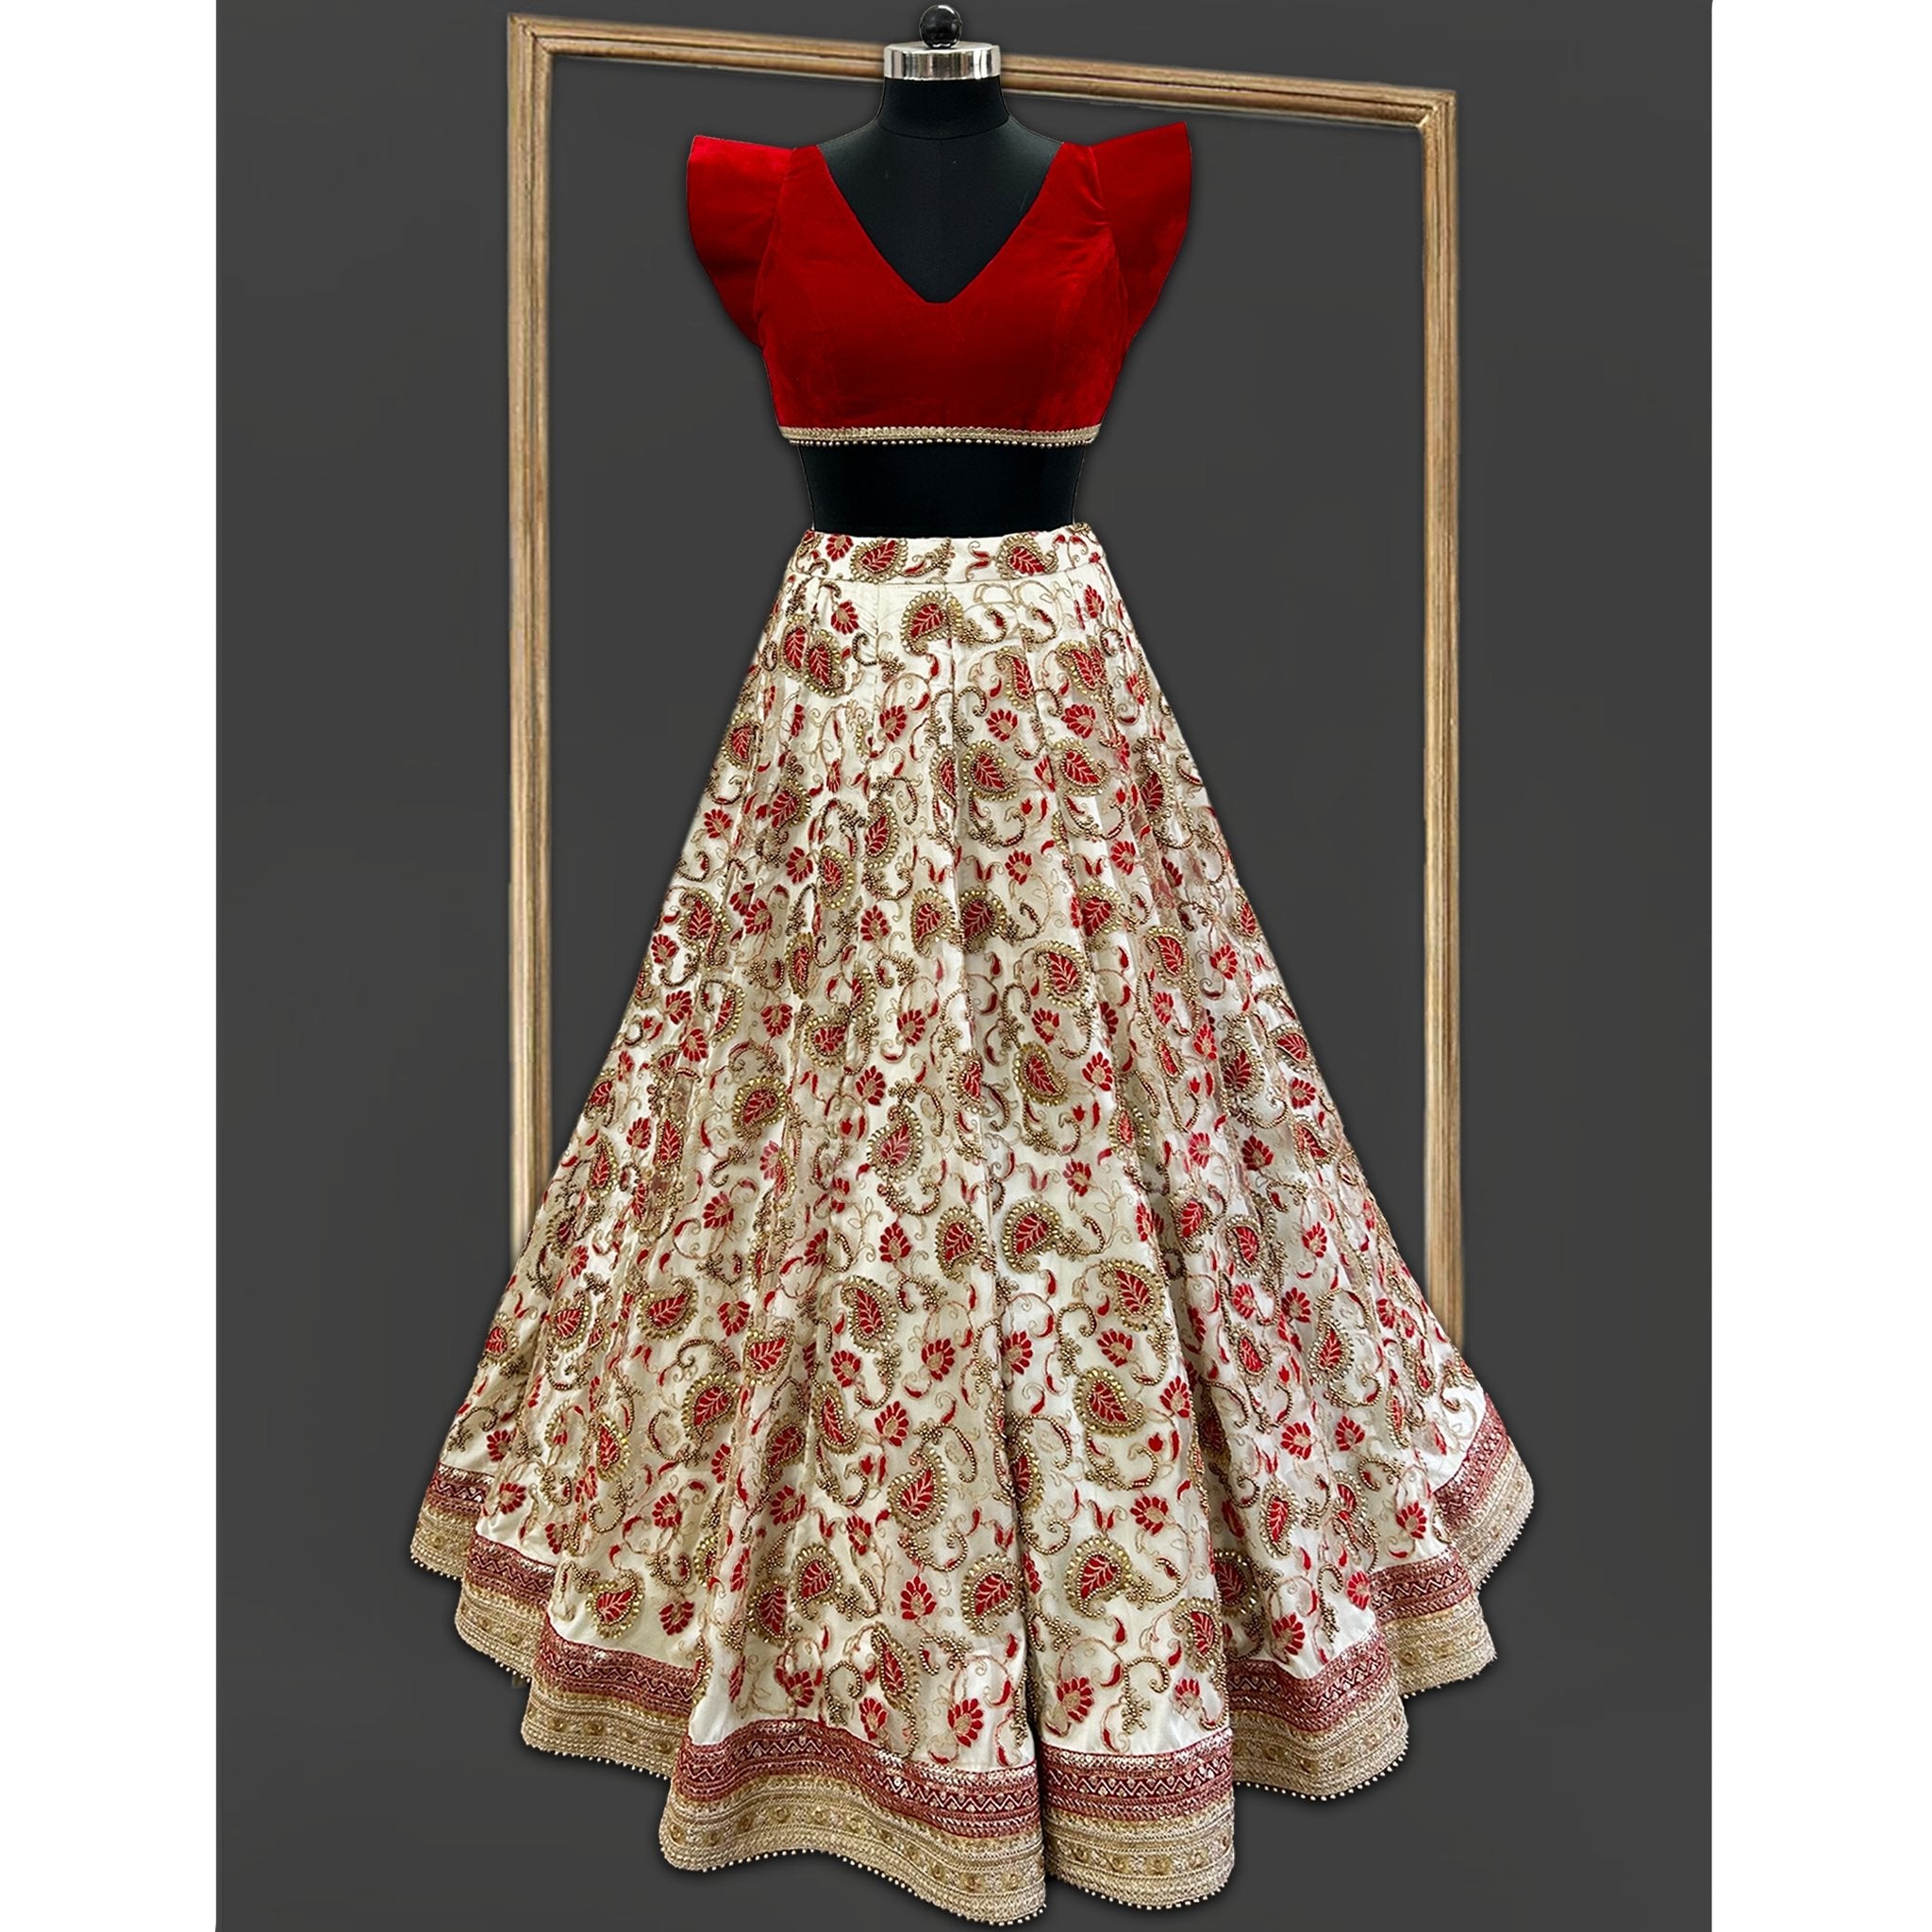 Gold and Red Embroidered Lehenga - Indian Designer Bridal Wedding Outfit